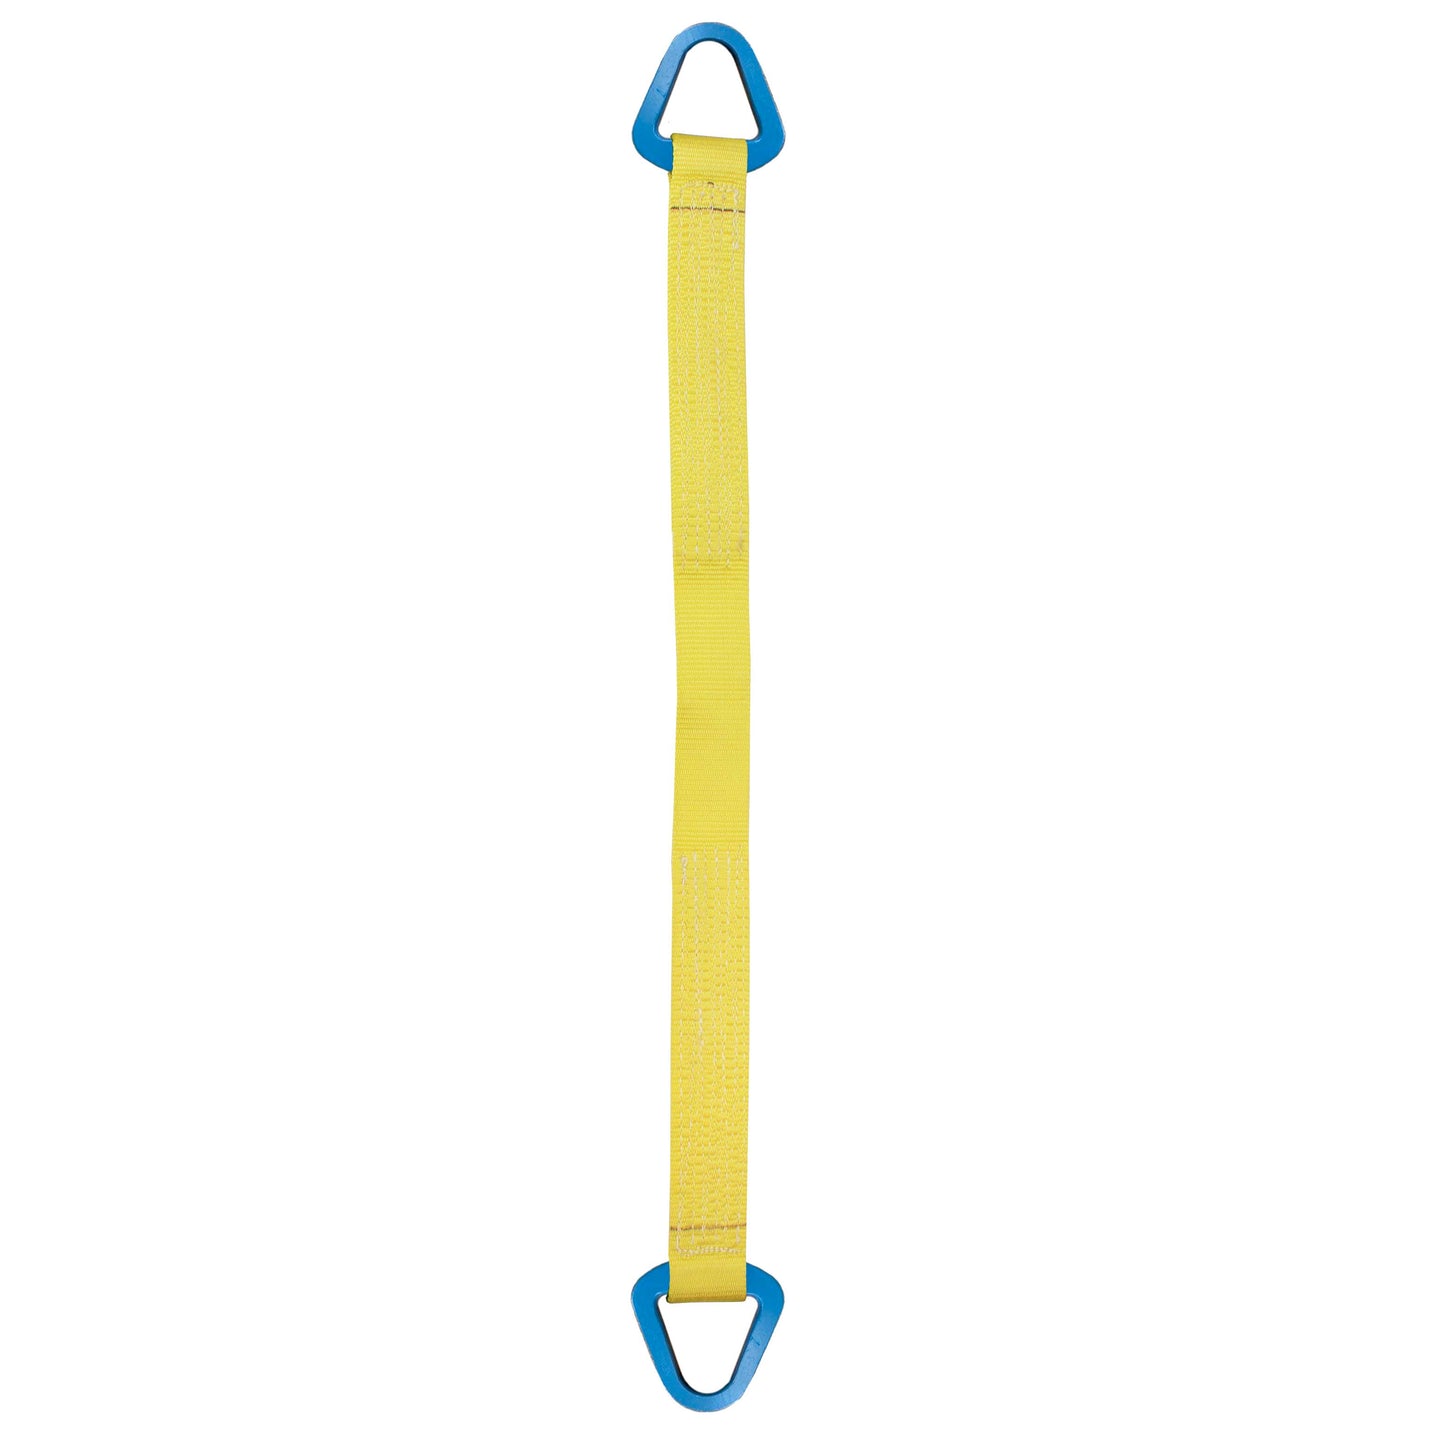 Nylon Lifting Sling Triangle 2 inch x 3 foot 1ply image 1 of 2